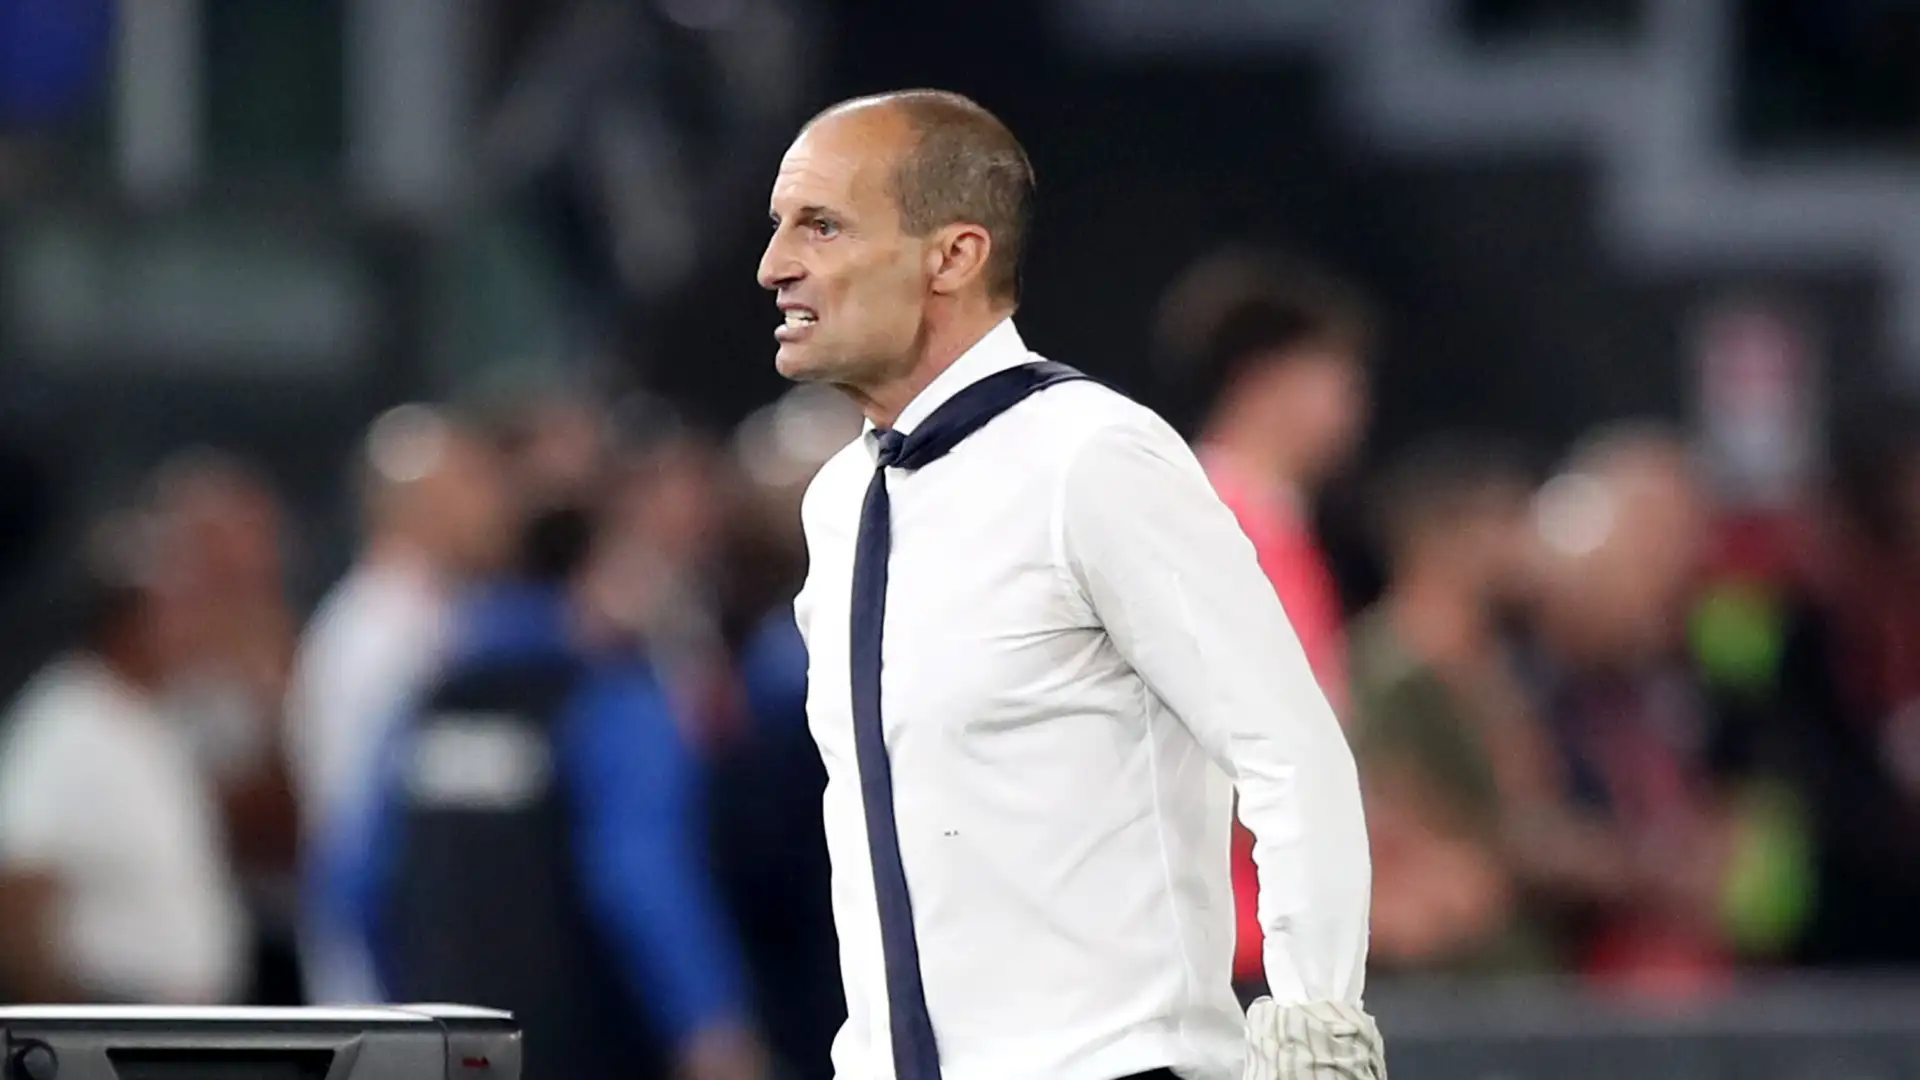 VIDEO: He's on a rampage! Massimiliano Allegri tears off his tie and unbuttons his shirt as he screams at officials after being sent off in Juventus' Coppa Italia final win against Atalanta